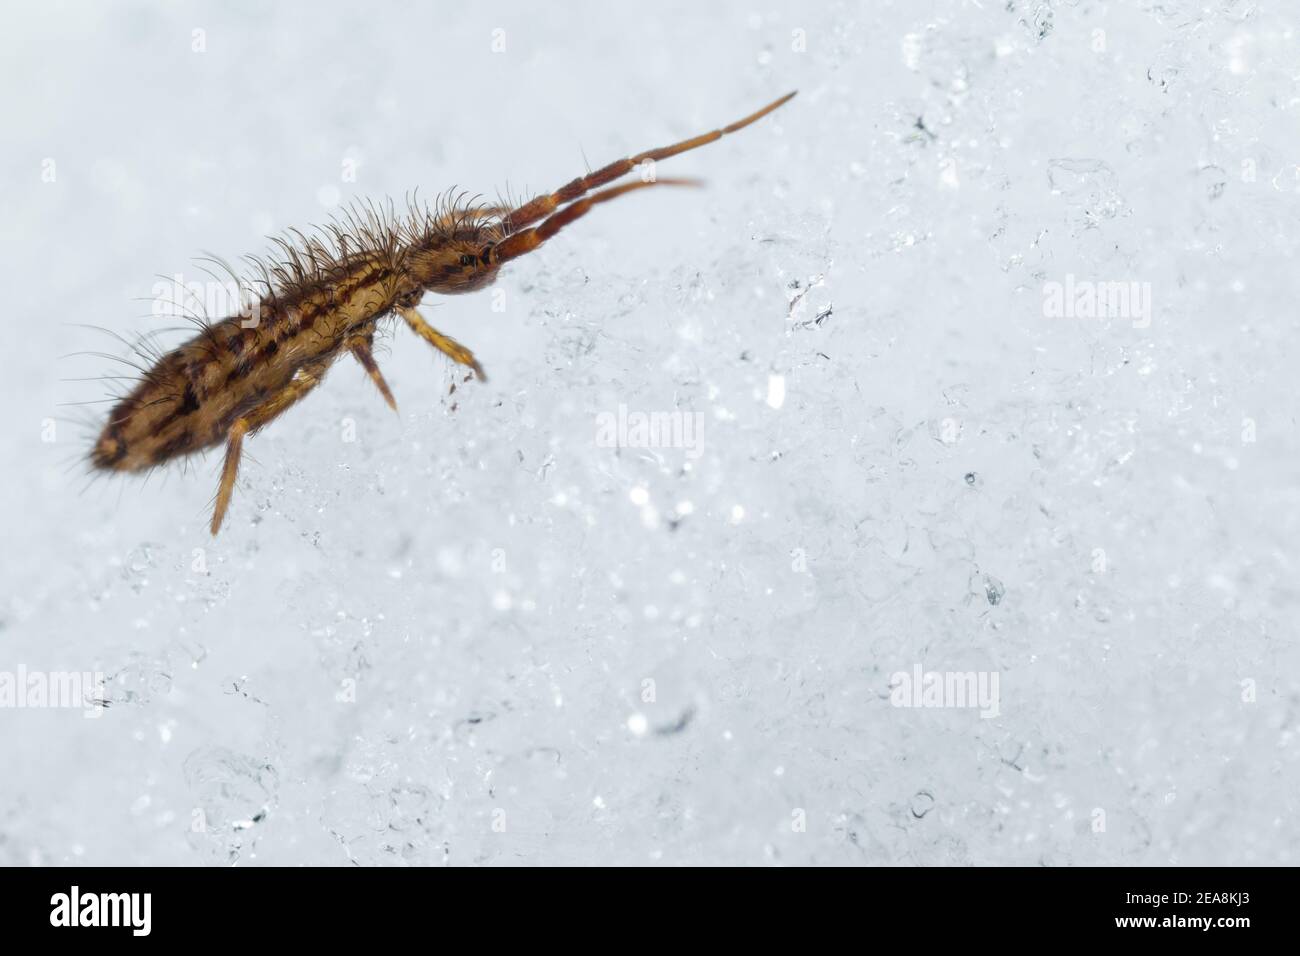 Slender springtail (Orchesella flavescens) walking on snow Stock Photo